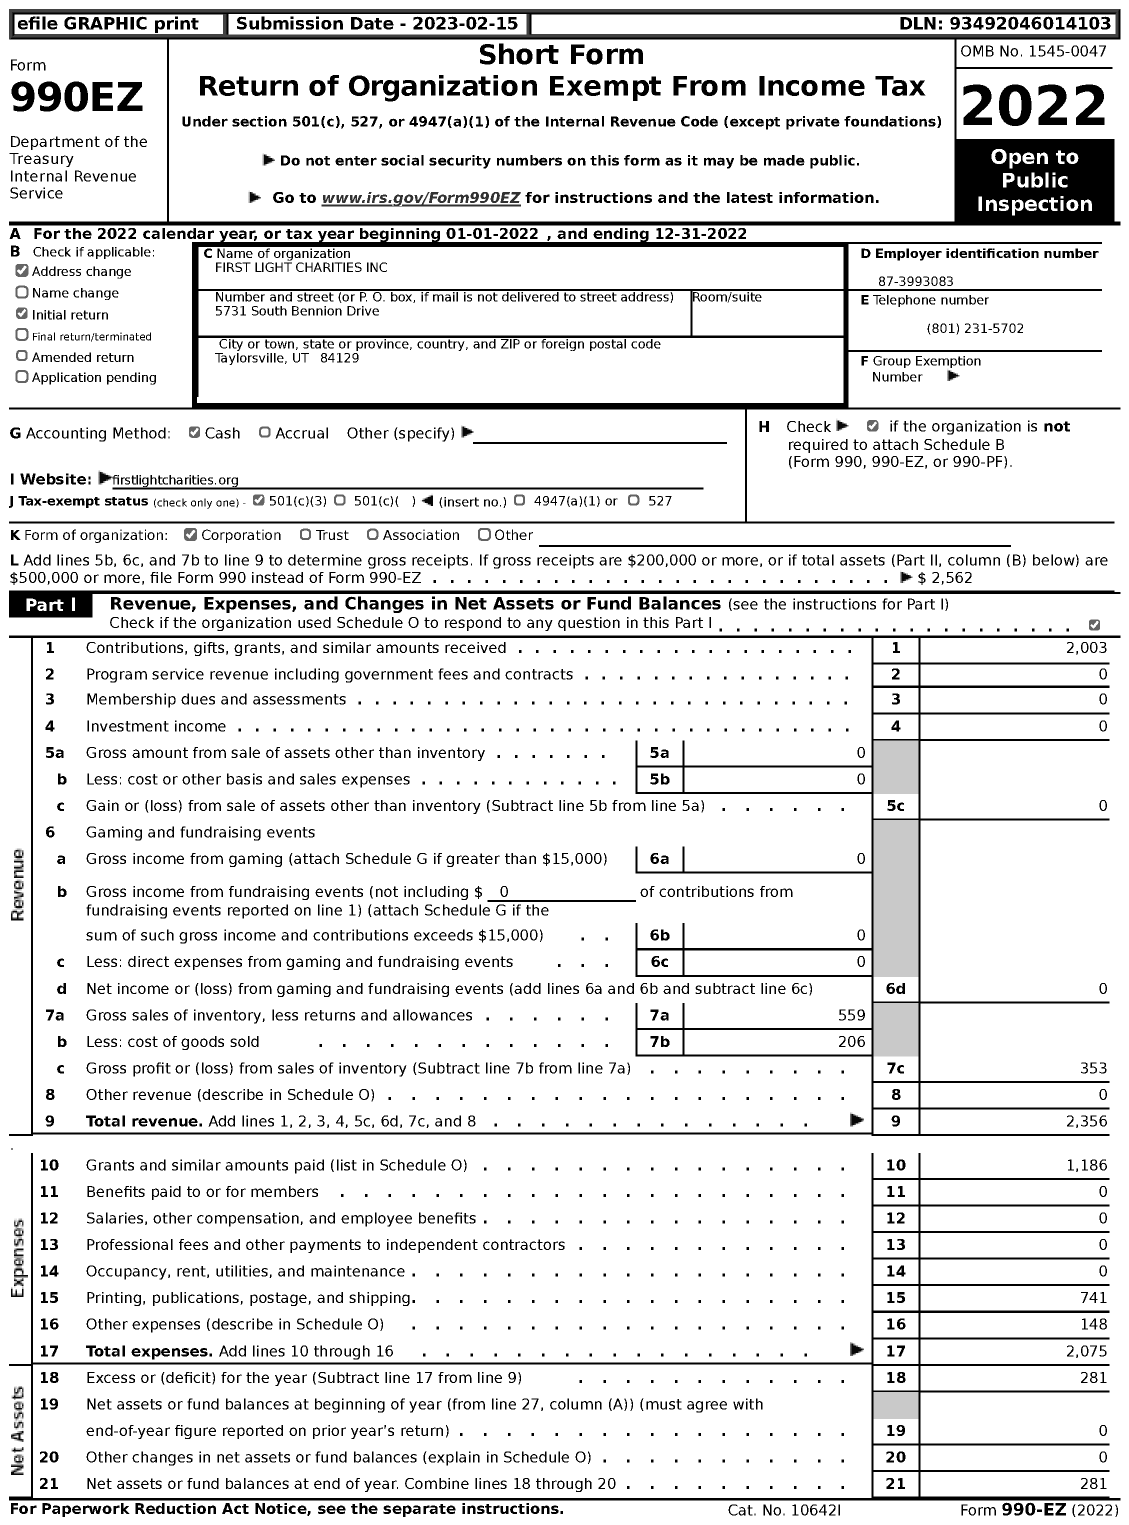 Image of first page of 2022 Form 990EZ for First Light Charities